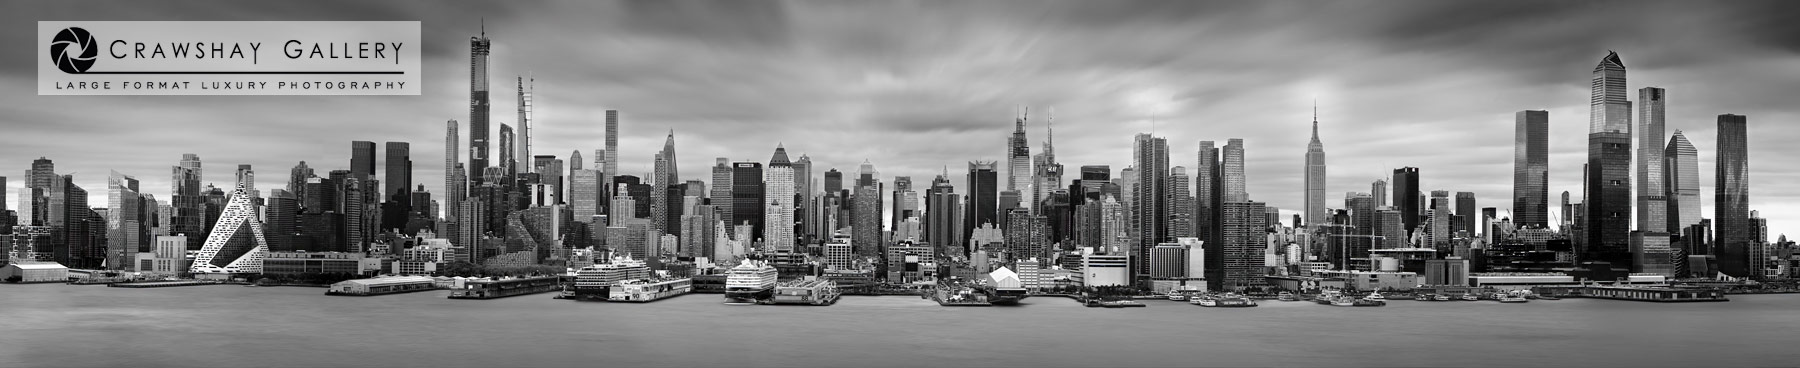 Image of New York Skyline in Black and White